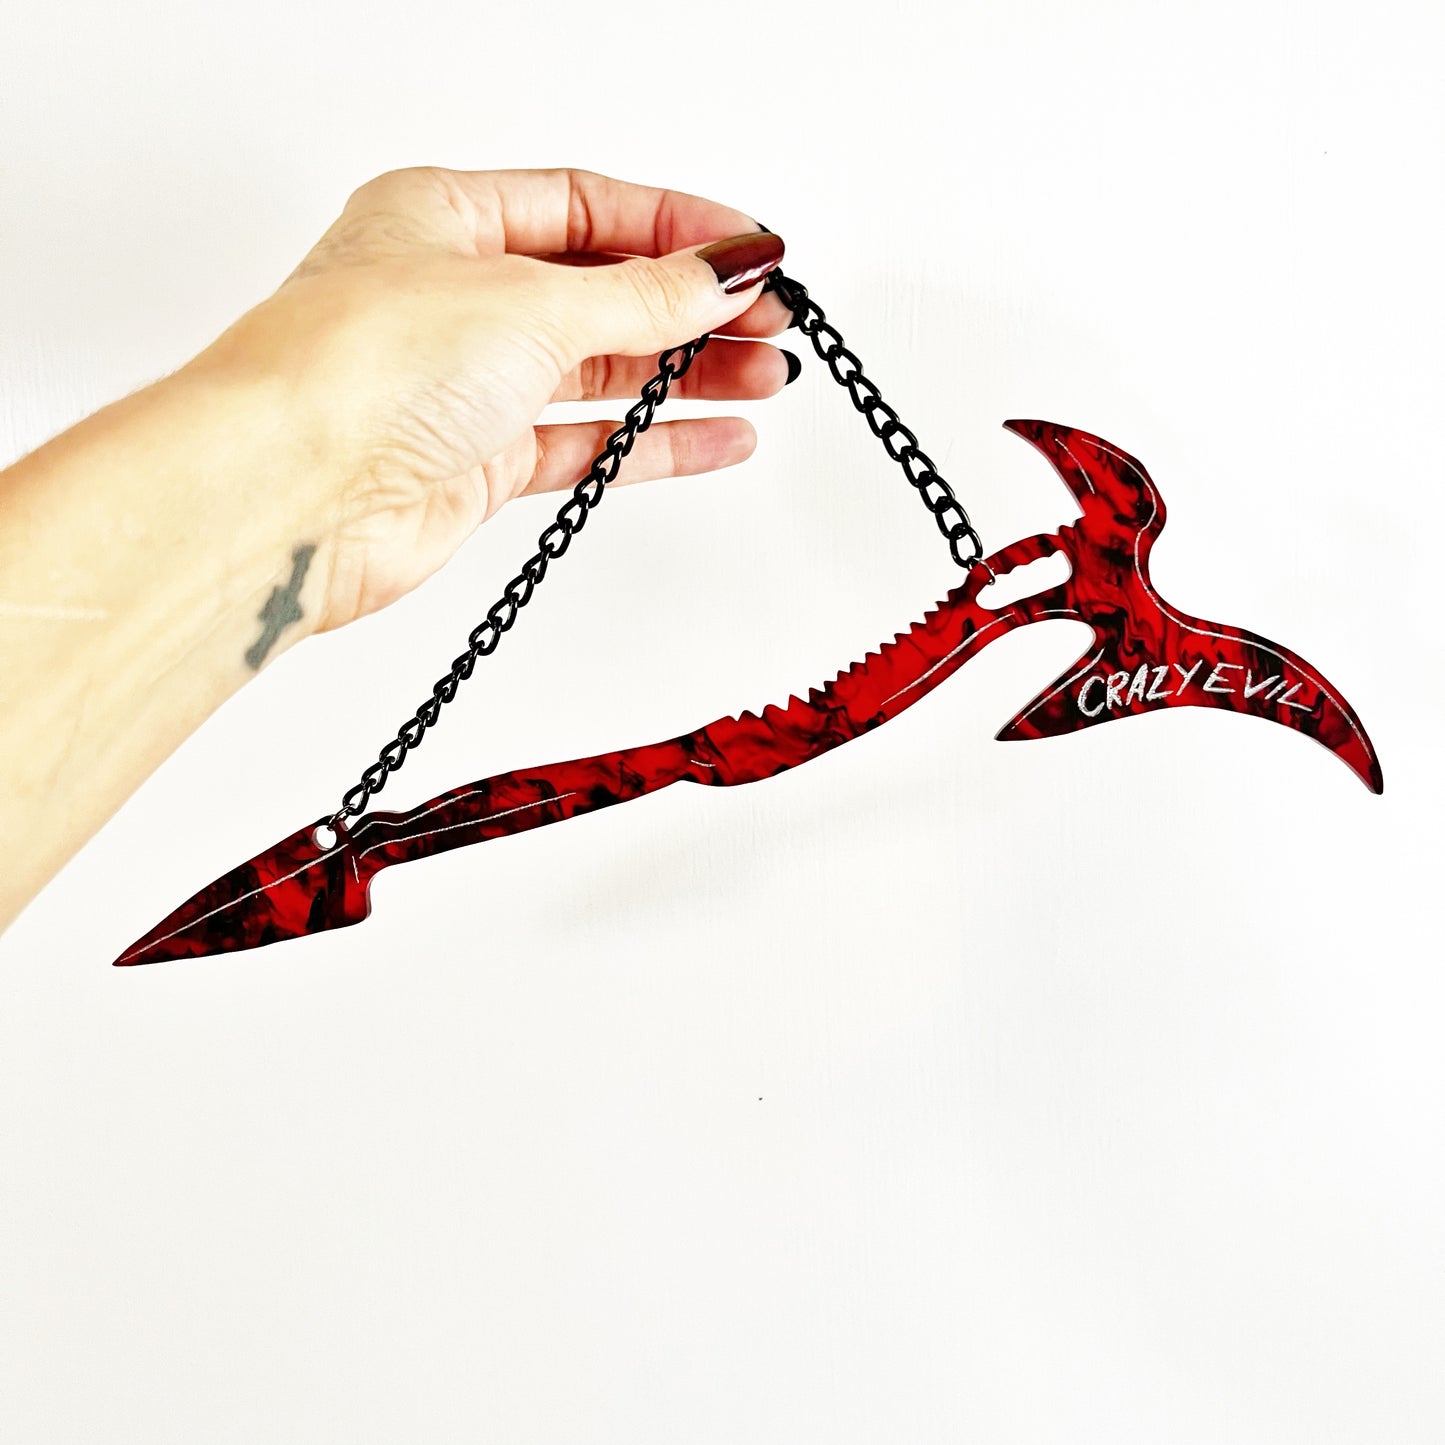 Mandy Movie Merch - A Replica of the weapon from the film, called "The Beast". Large red and black swirled syth-axe hybrid hanging from a black chain.